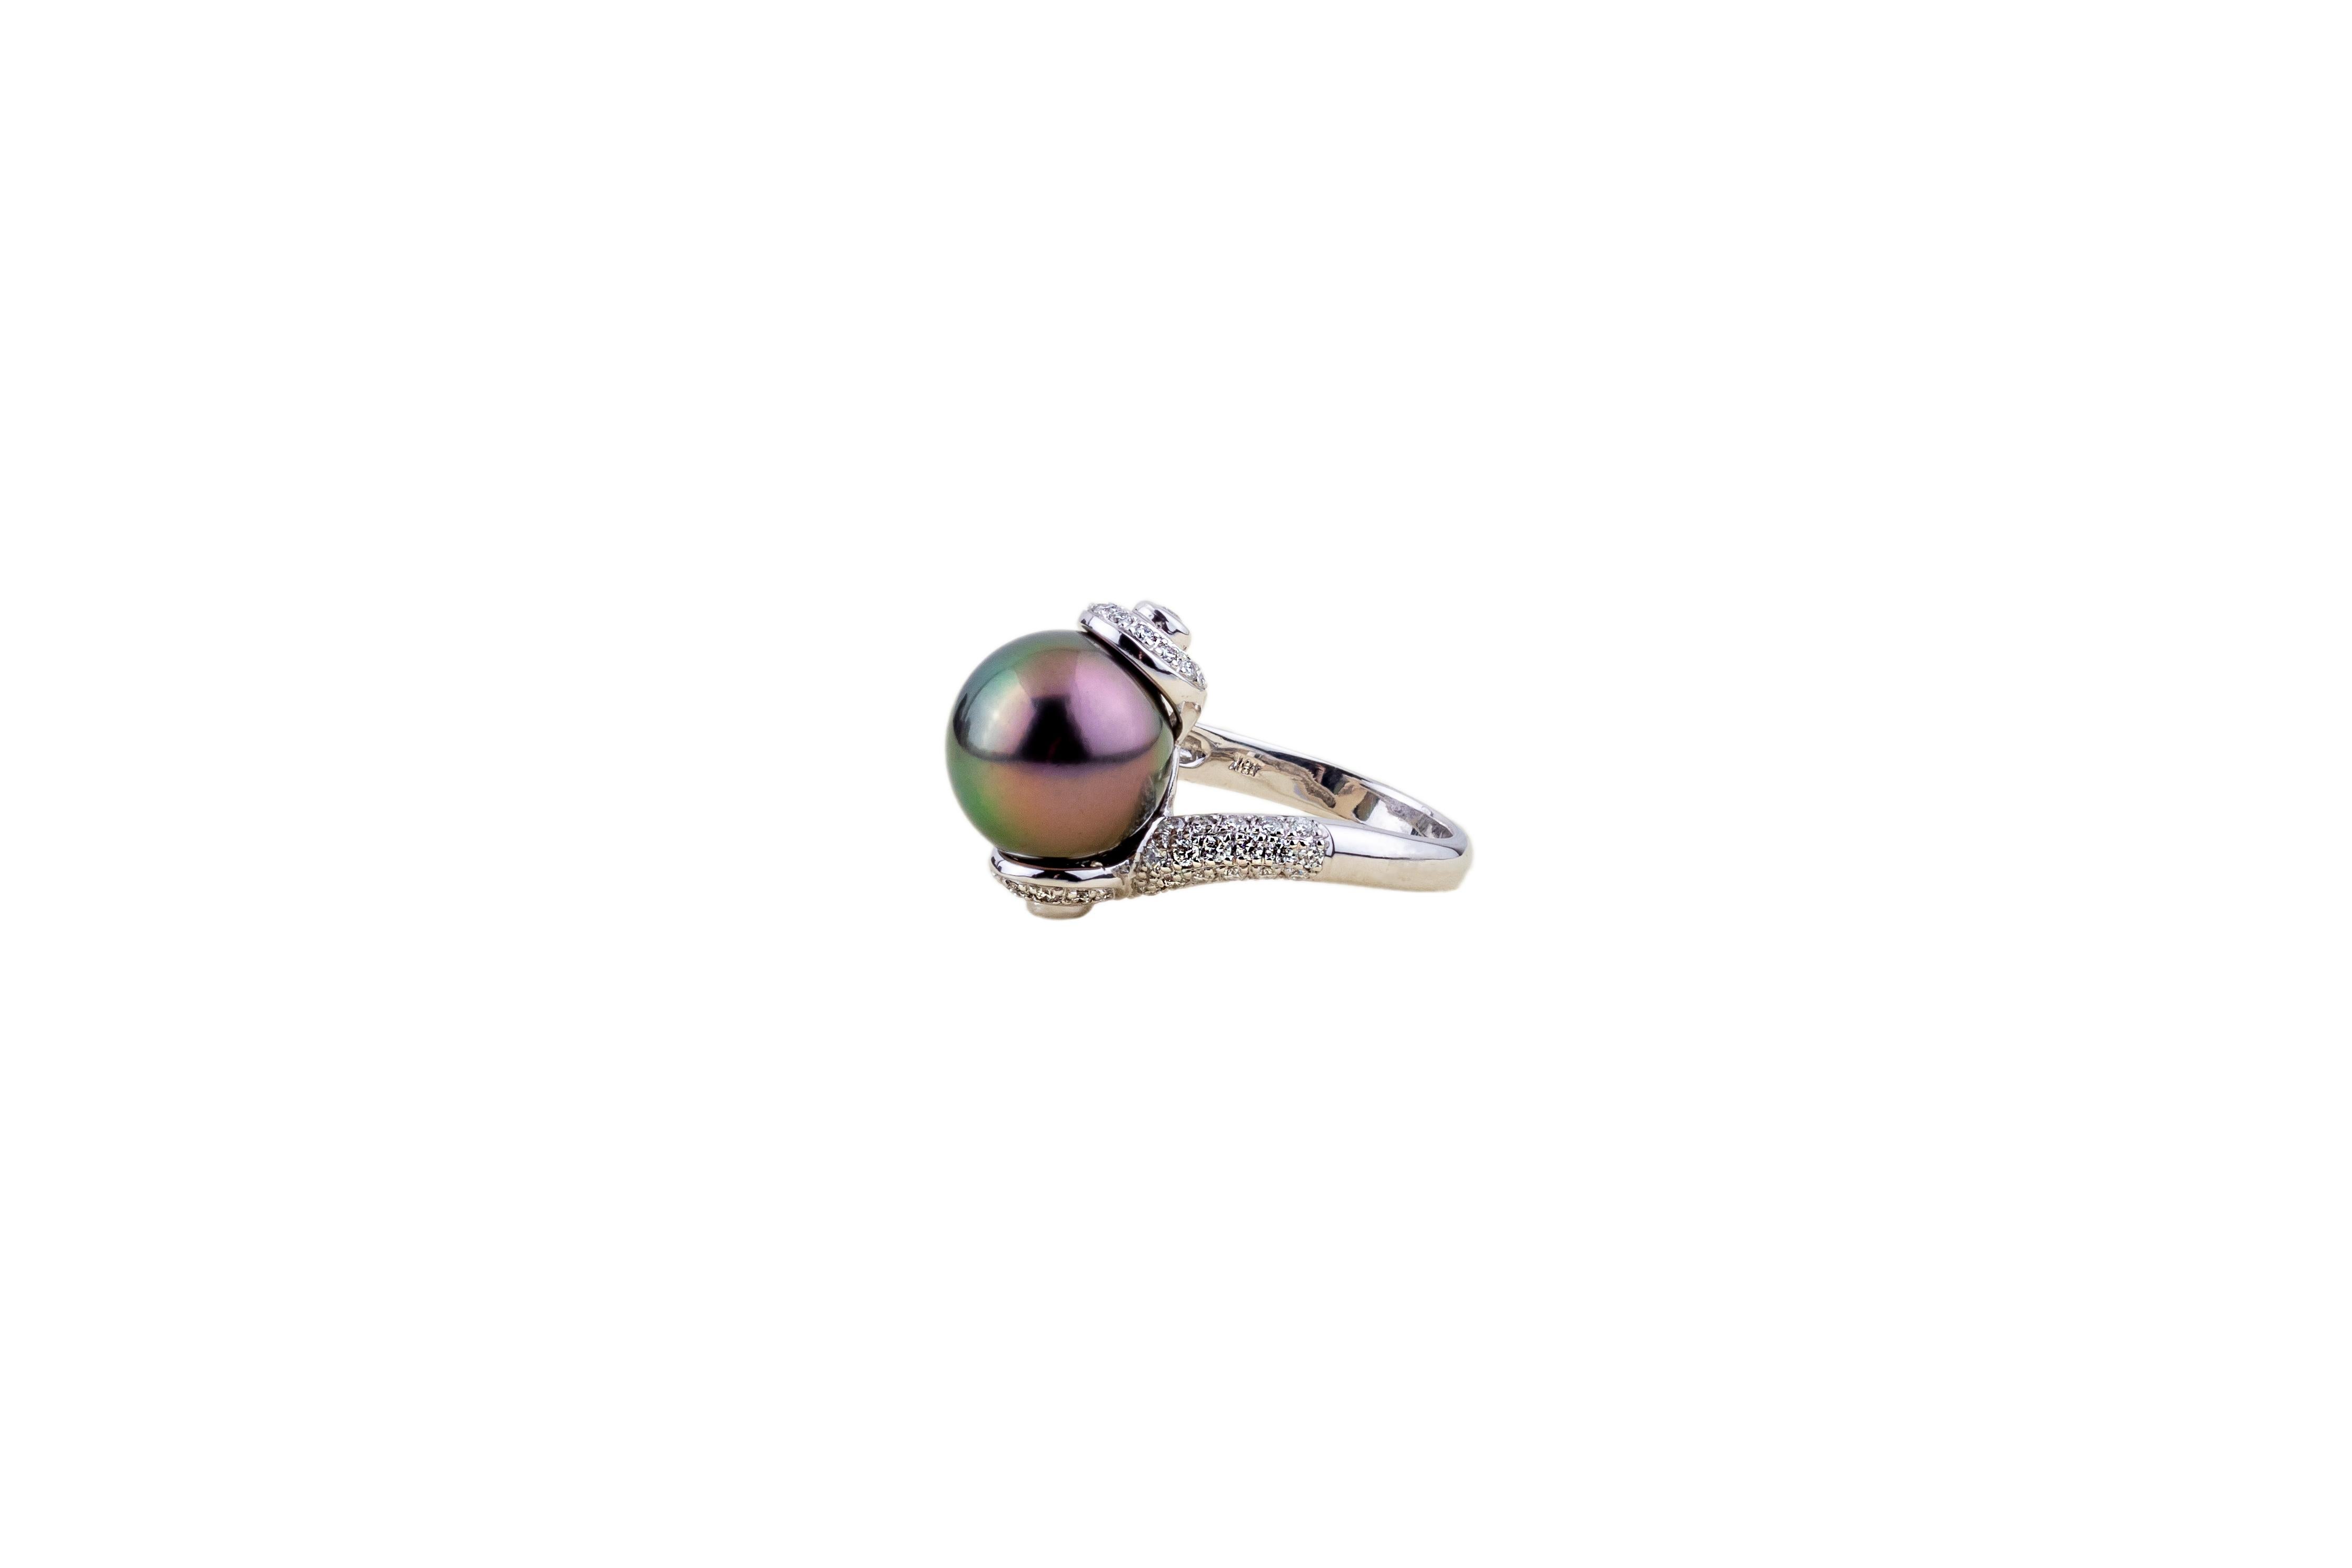 18 k white gold
Fineness punched with 18 k
1 Tahitian pearl diameter 13 mm
0.81 ct diamonds
Ring size 17
Weight 11 grams
